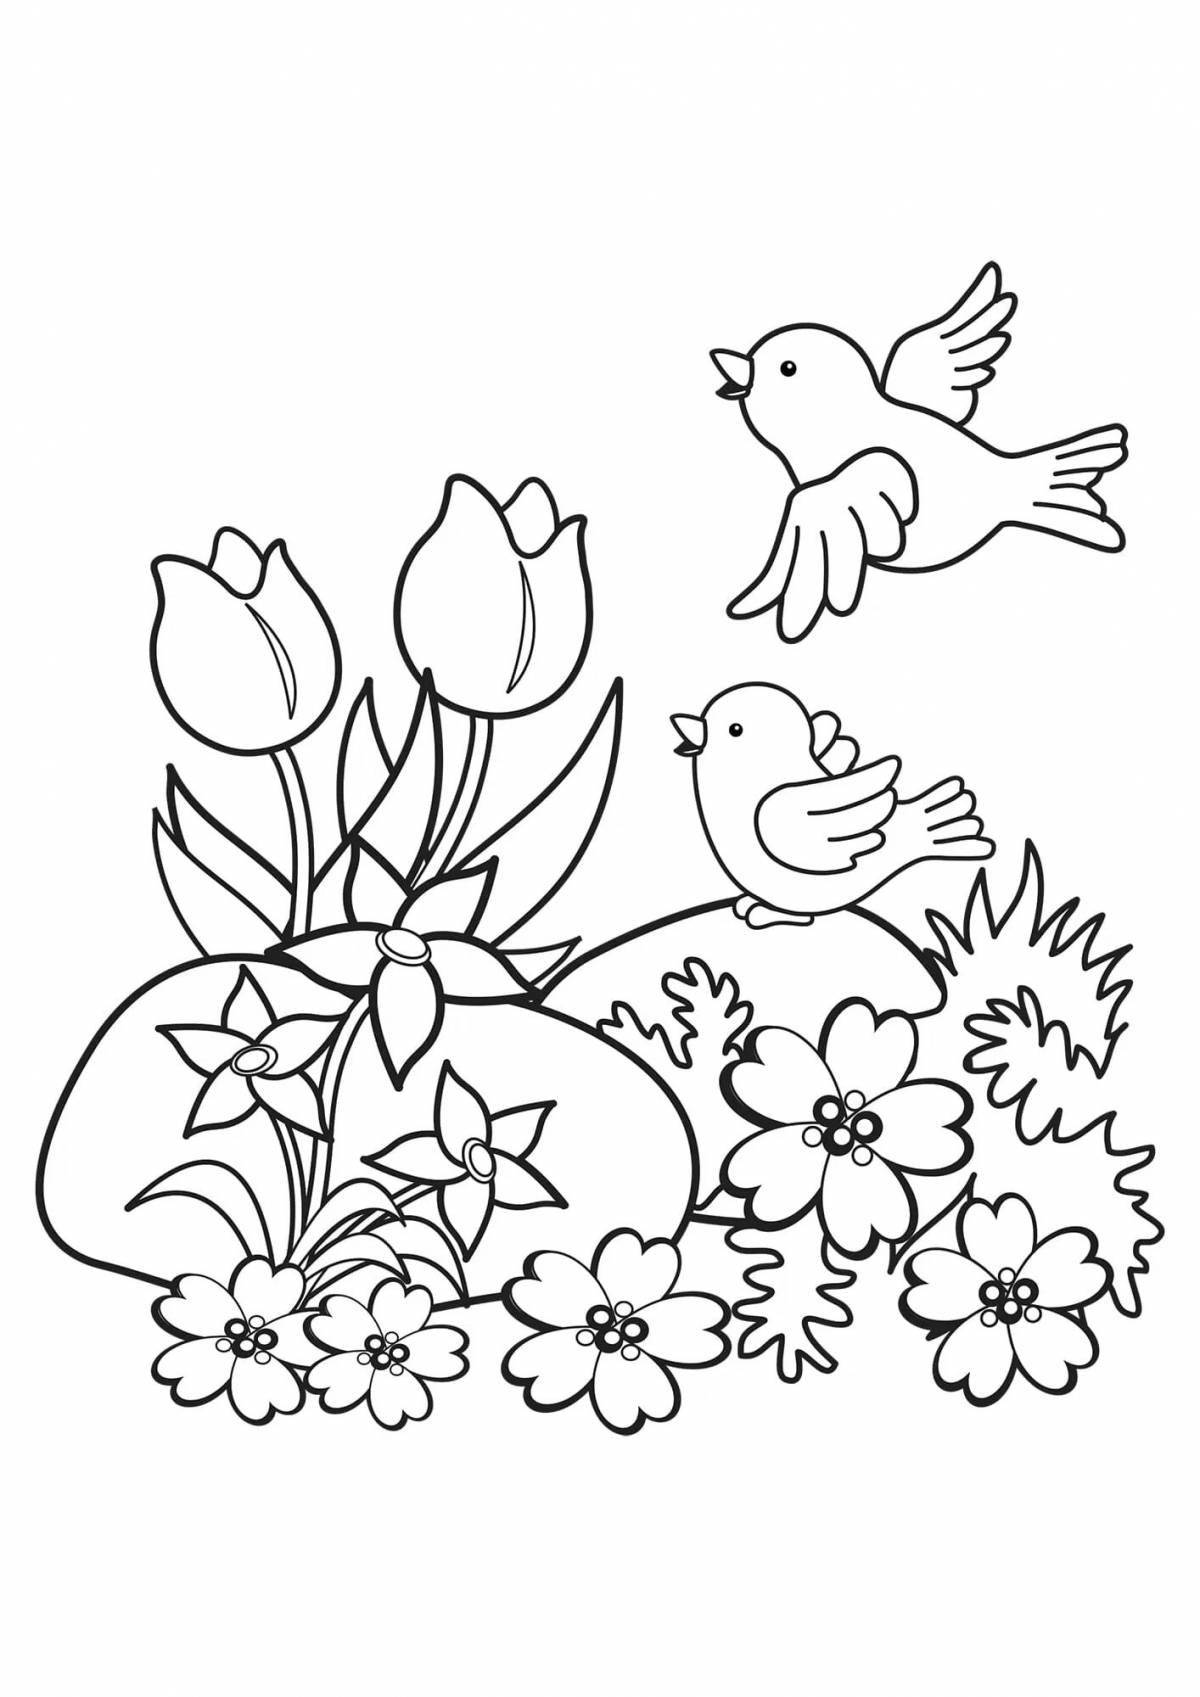 Joyful spring coloring for children 6-7 years old